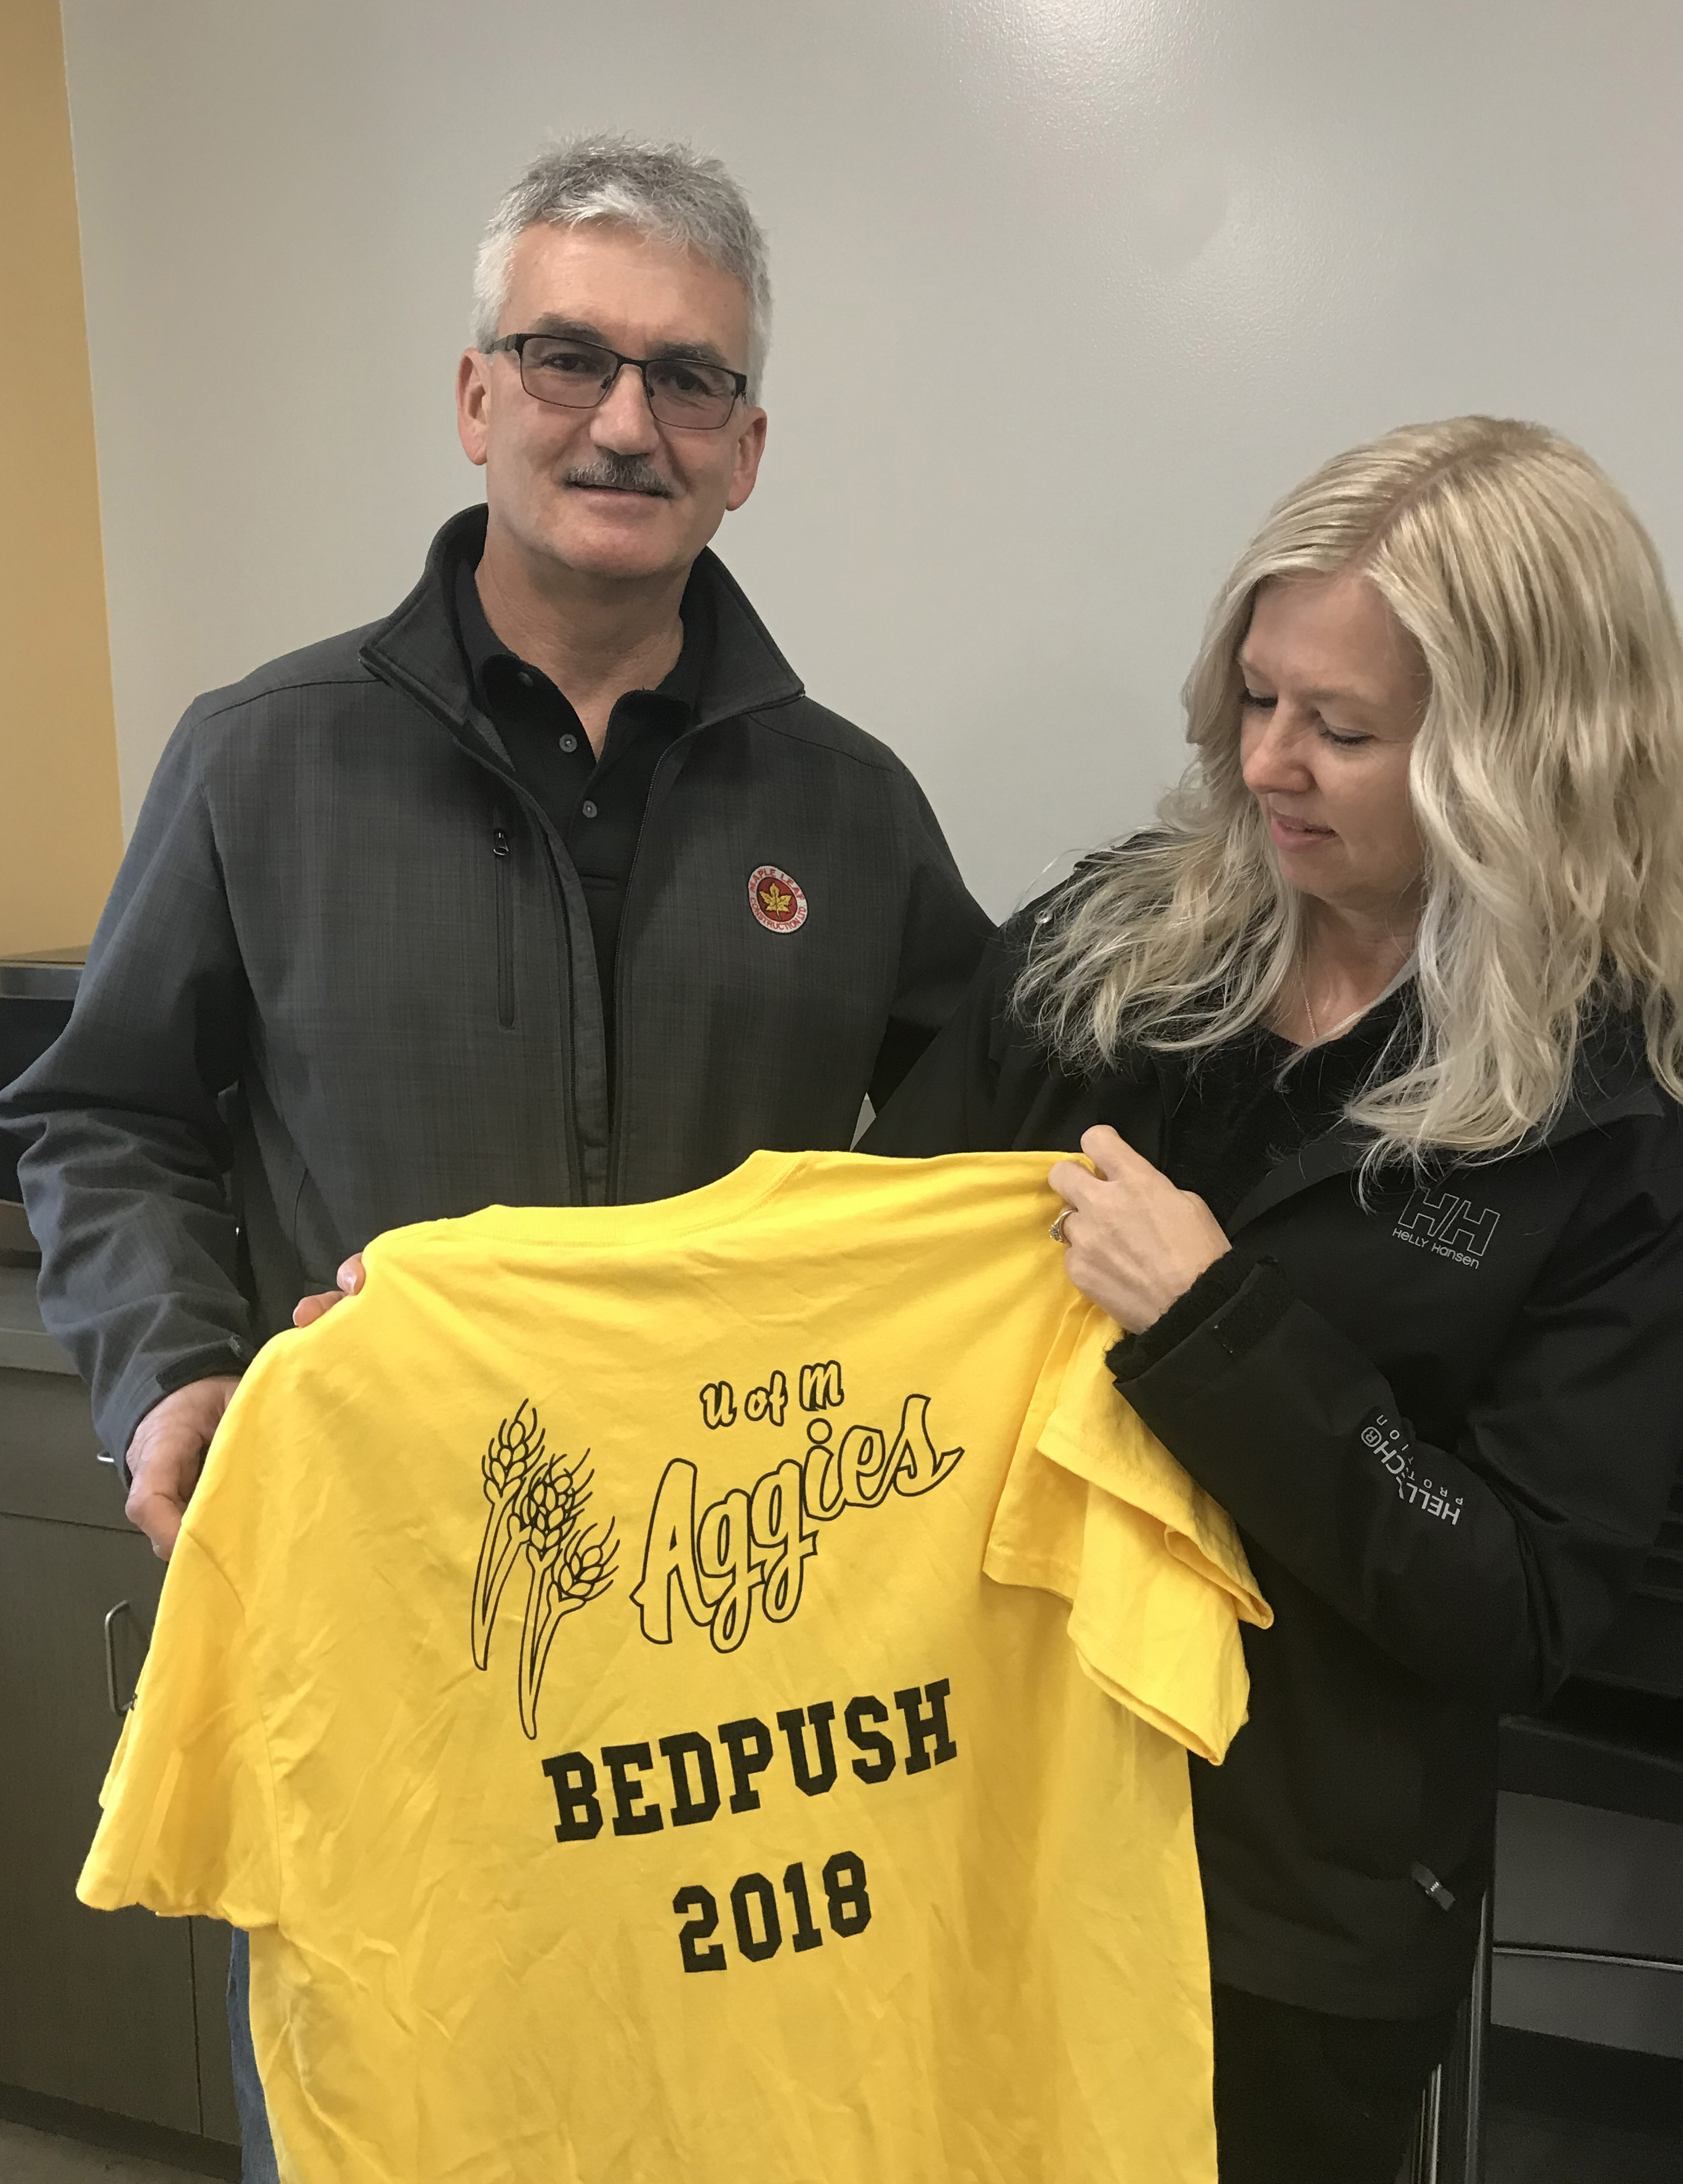 Bruce and Kim Bateman, Kyla's parents, hold the Bedpush shirt with Kyla's initials